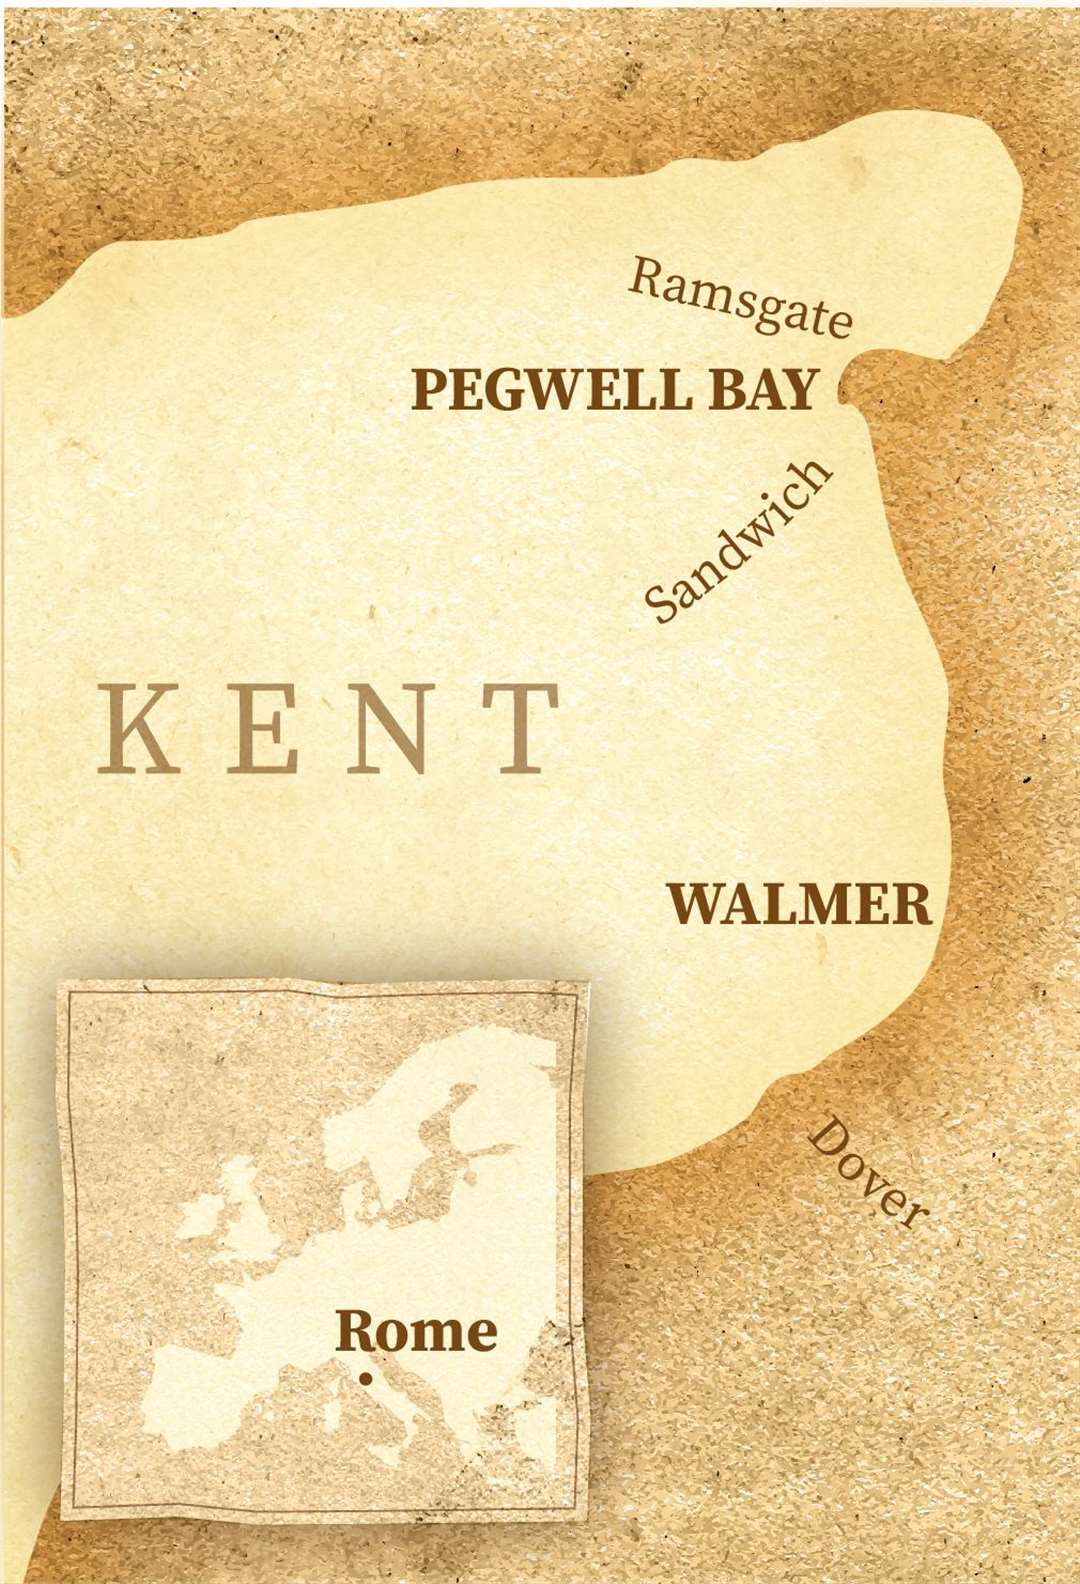 Romans first arrived in Kent in AD55